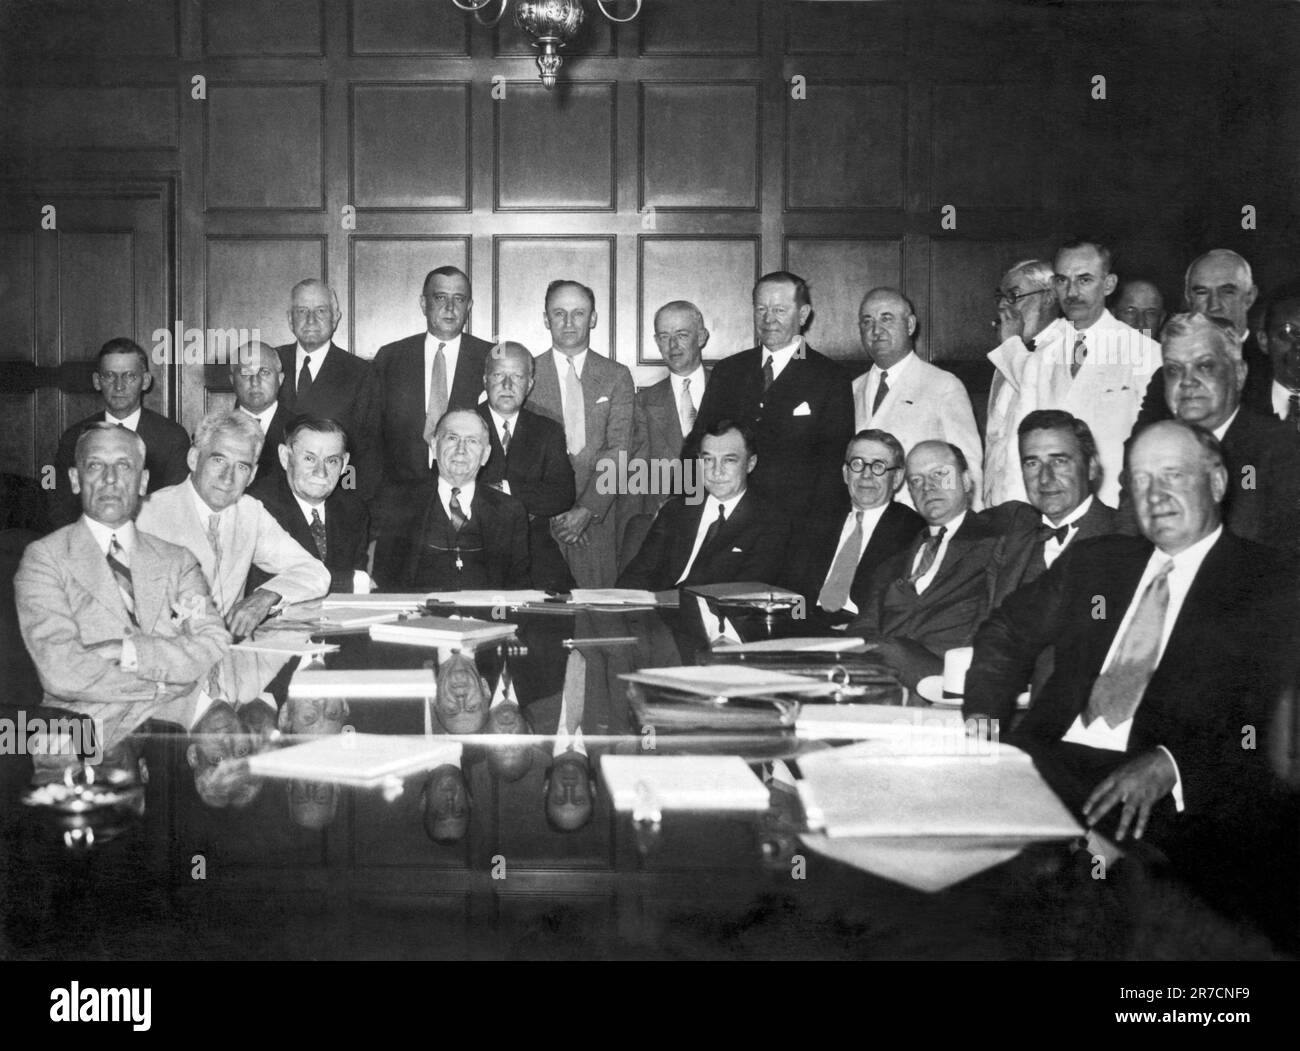 Washington D.C.:  June 26, 1933. Leaders of United States industry are meeting in Washington to serve as advisors to the National Recovery Administration. L-R: Alfred Sloan, President, General Motors; Gerard Swope, President, General Electric; Col. Edward Hurley; Daniel Roper, Secretary of Commerce; Melvin Traylor, President, First National Bank of Chicago; Ewing Mitchell, Asst. Secretary of Commerce; John Dickinson, Asst. Secretary of Commerce; Robert Elbert, Chairman of the Board, Aeolian Company; R.E. Wood, President, Sears and Robuck; H.P. Kendall, President, The Kendall Company; Fred Kent Stock Photo